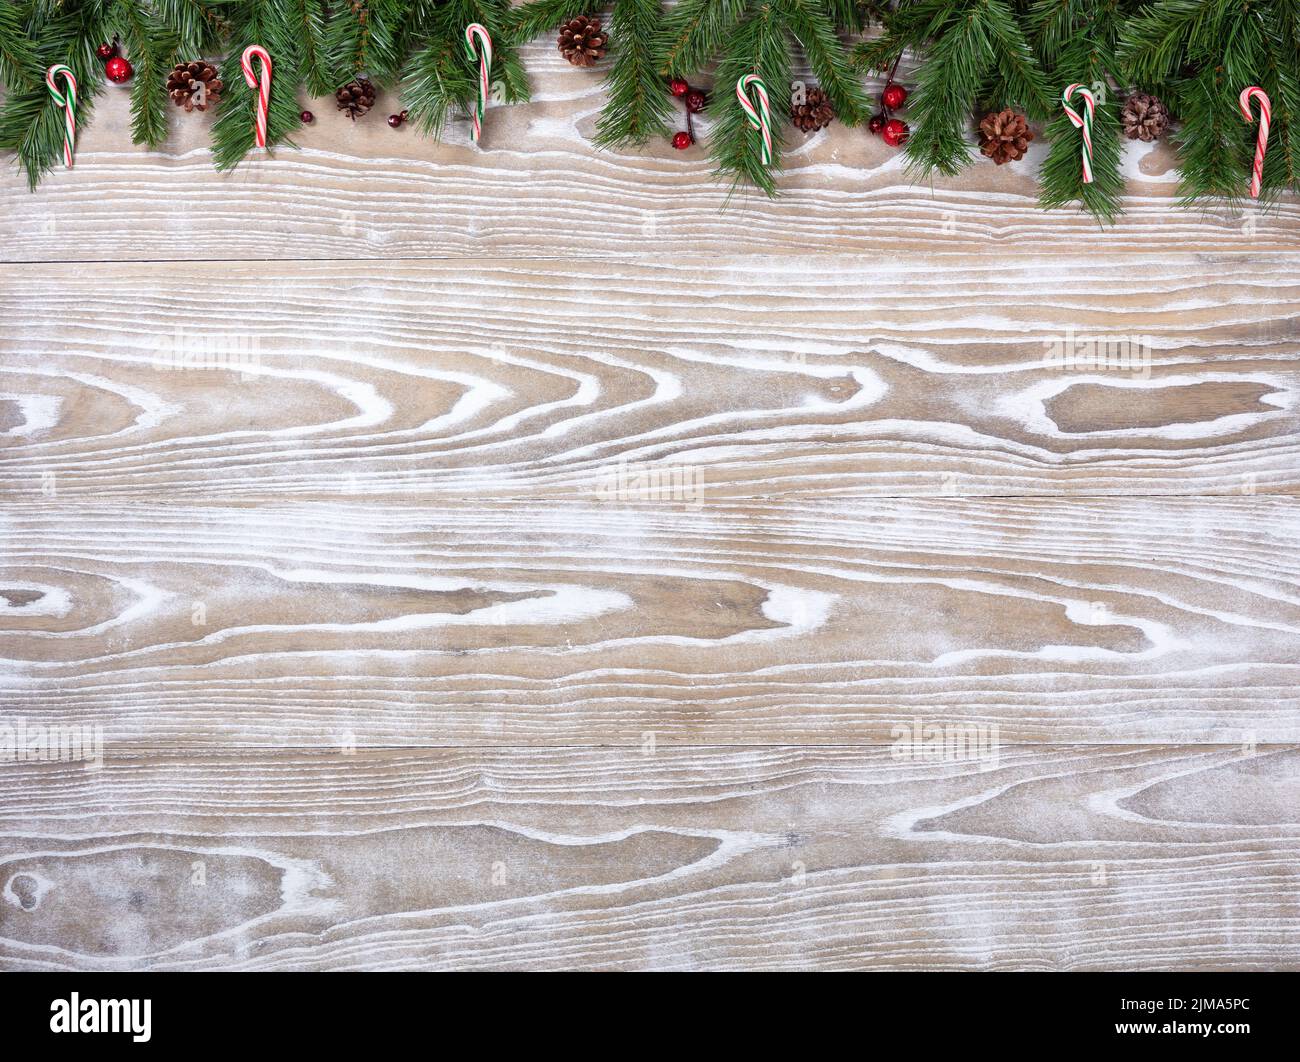 Rustic white wooden boards with fir branches for Christmas season concept Stock Photo